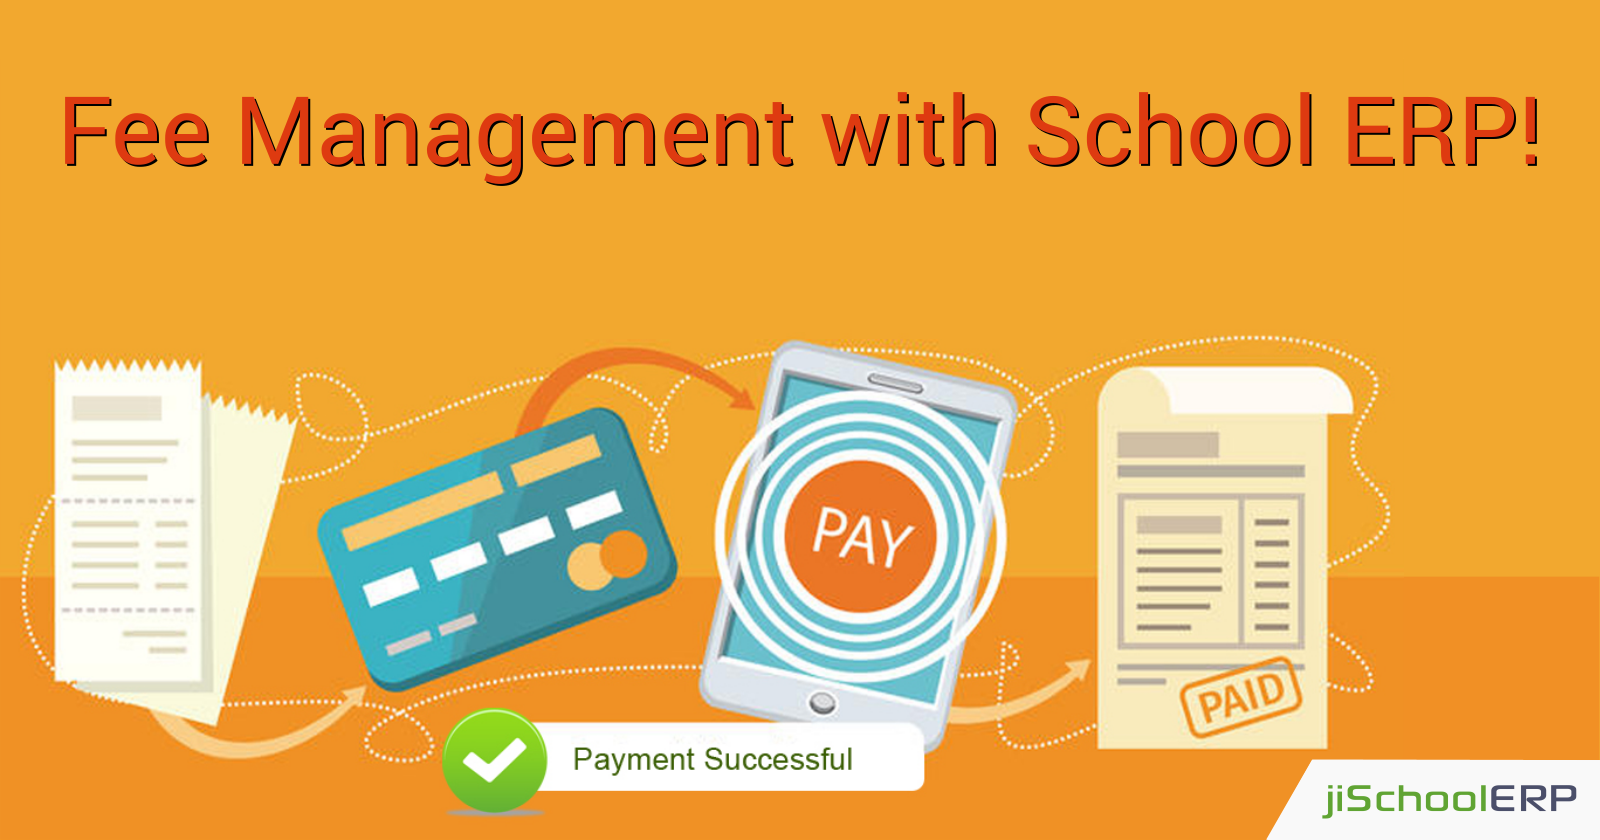 Make your Fee Management System Hassle-free and Accurate with School ERP!